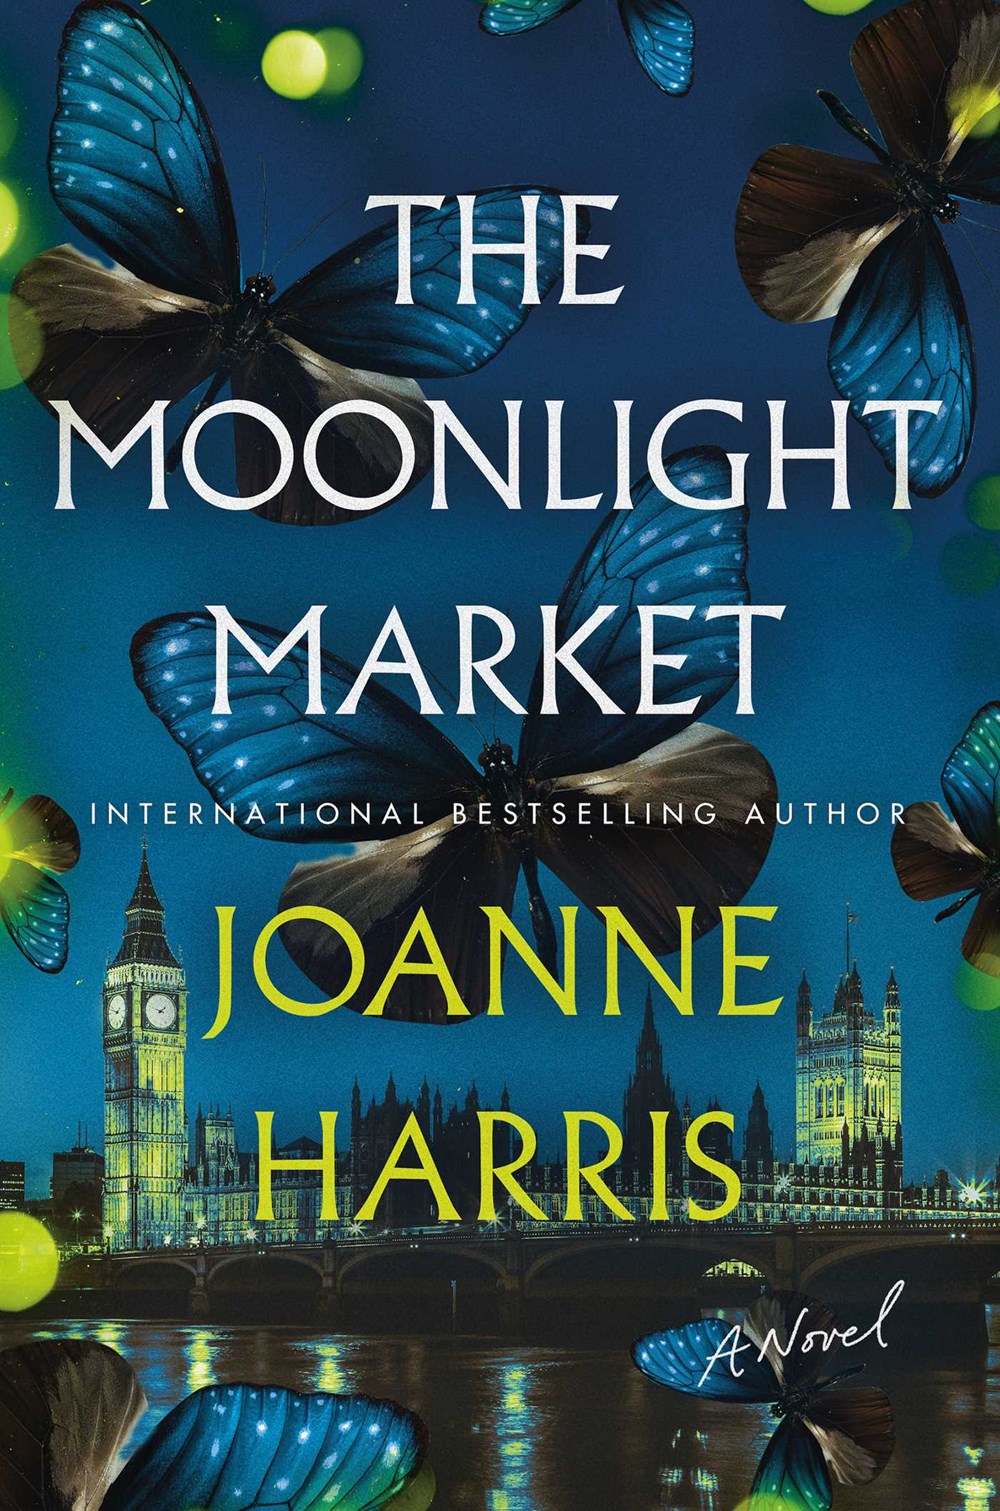 ‘The Moonlight Market’ by Joanne Harris | SFF Pick of the Month